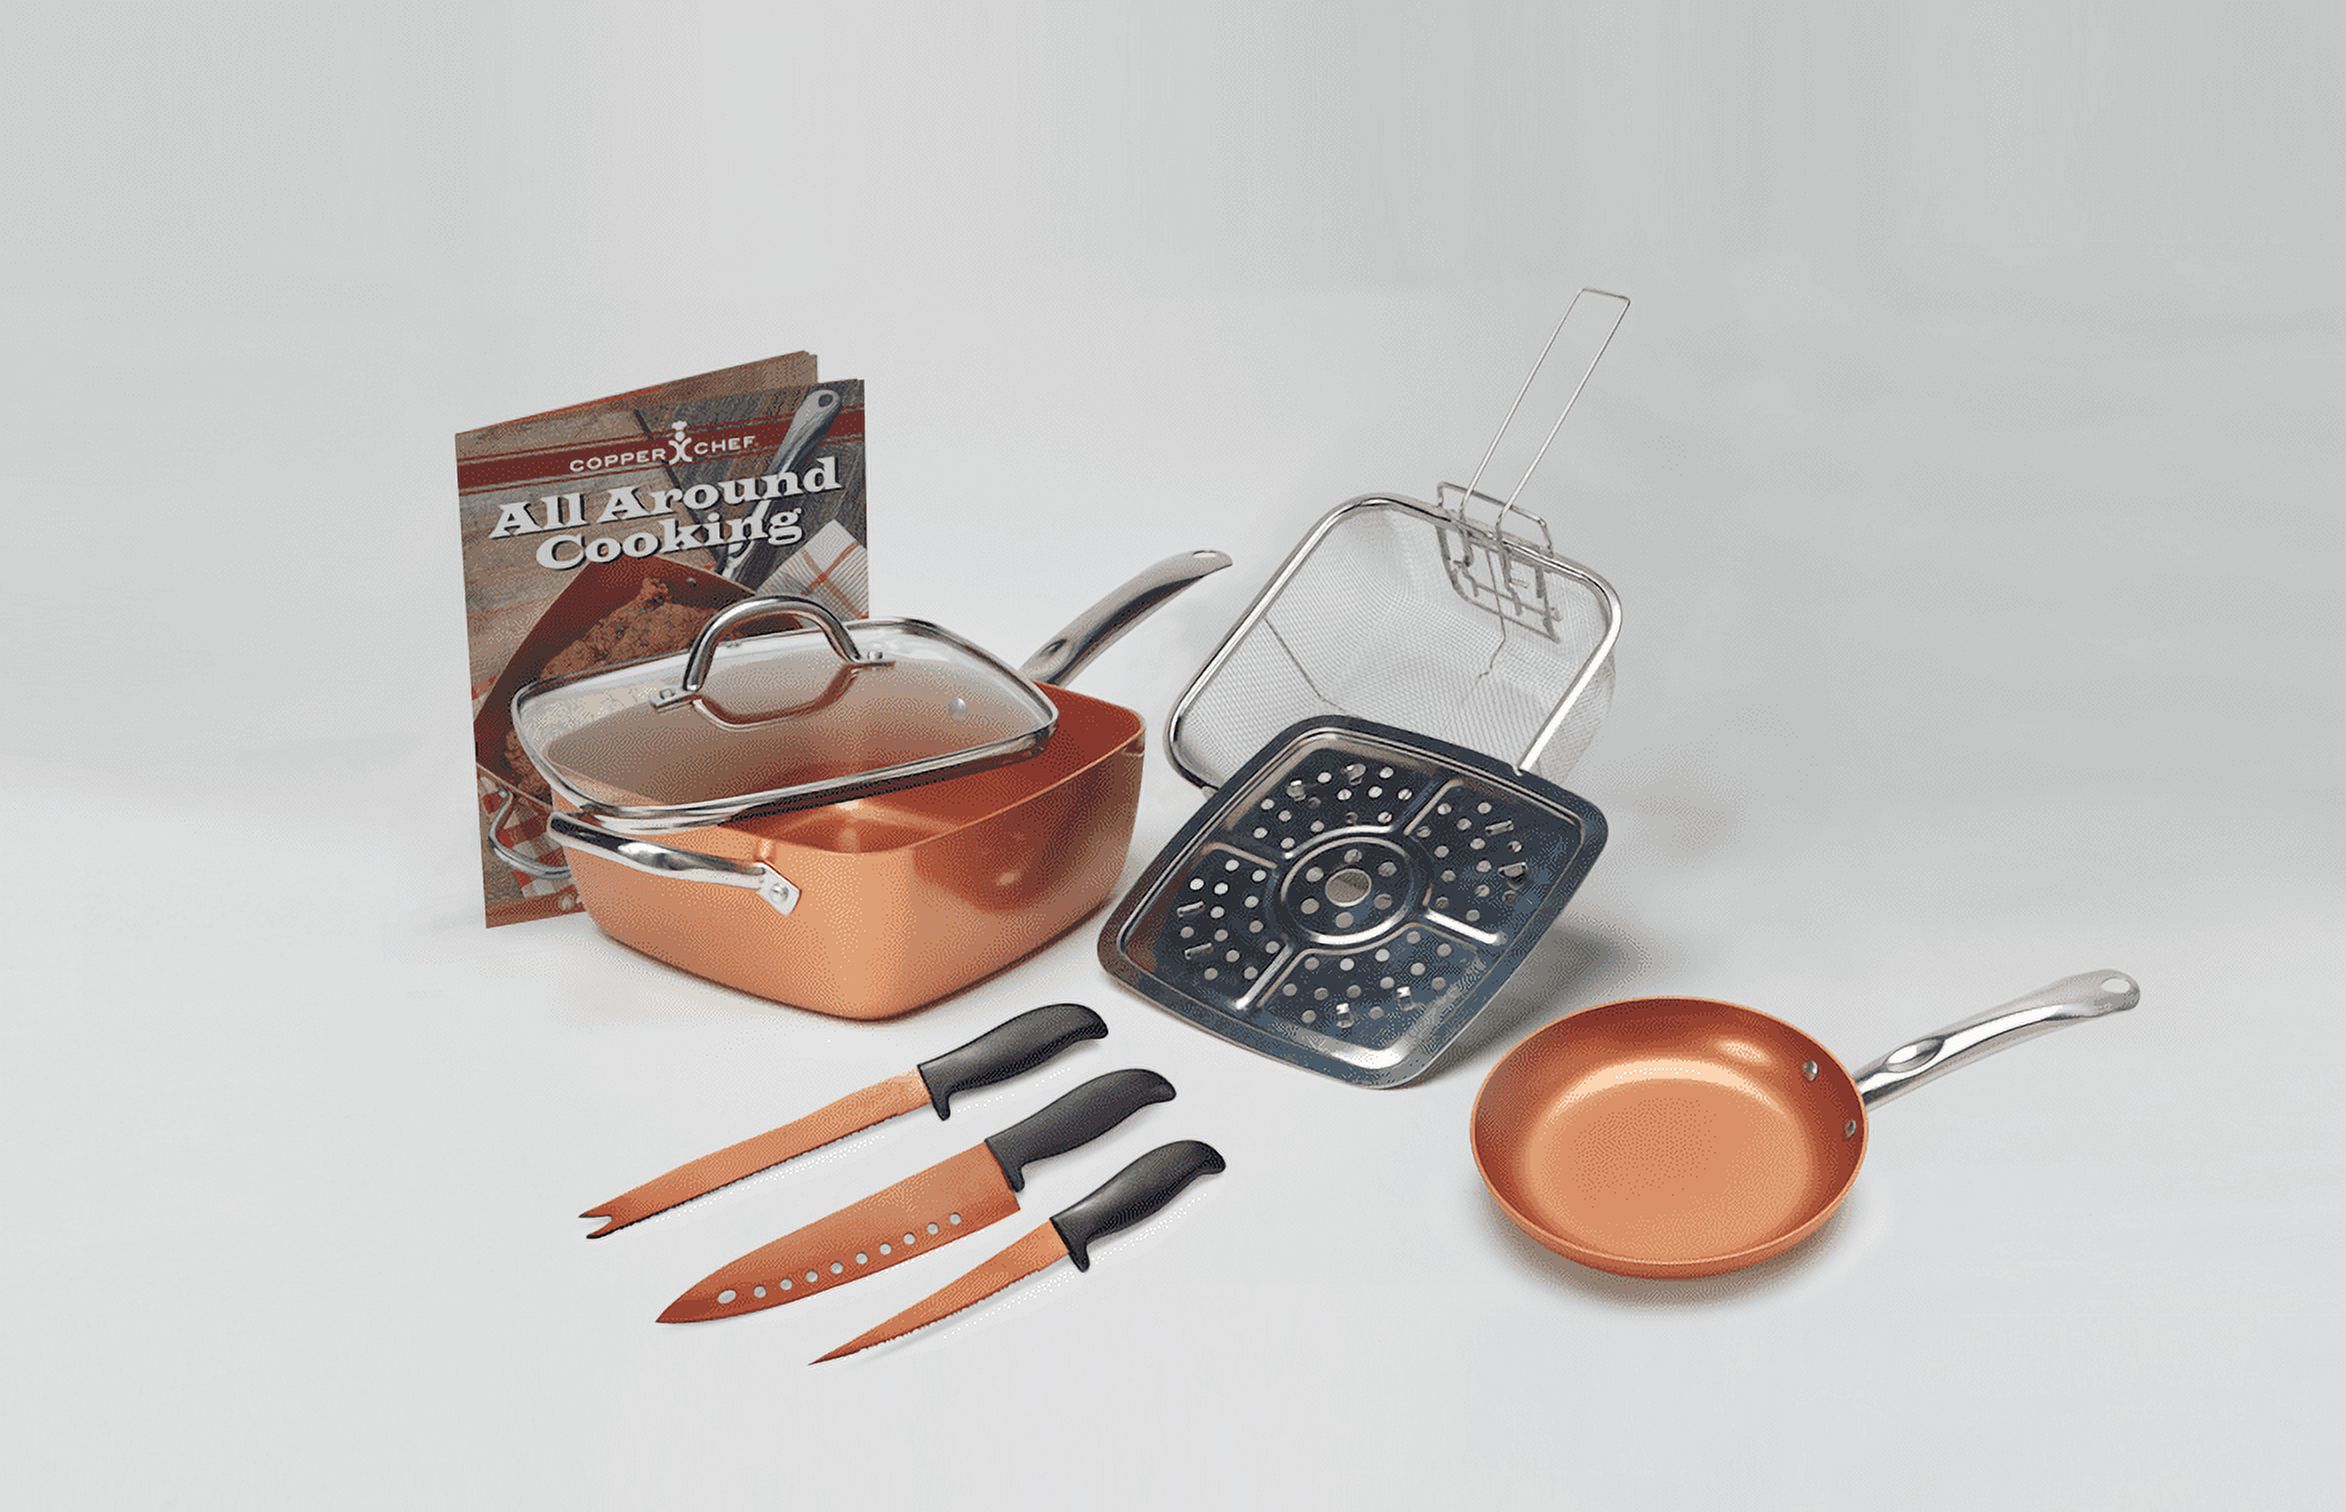 Copper Chef 9 Piece Cookware Set - image 3 of 3